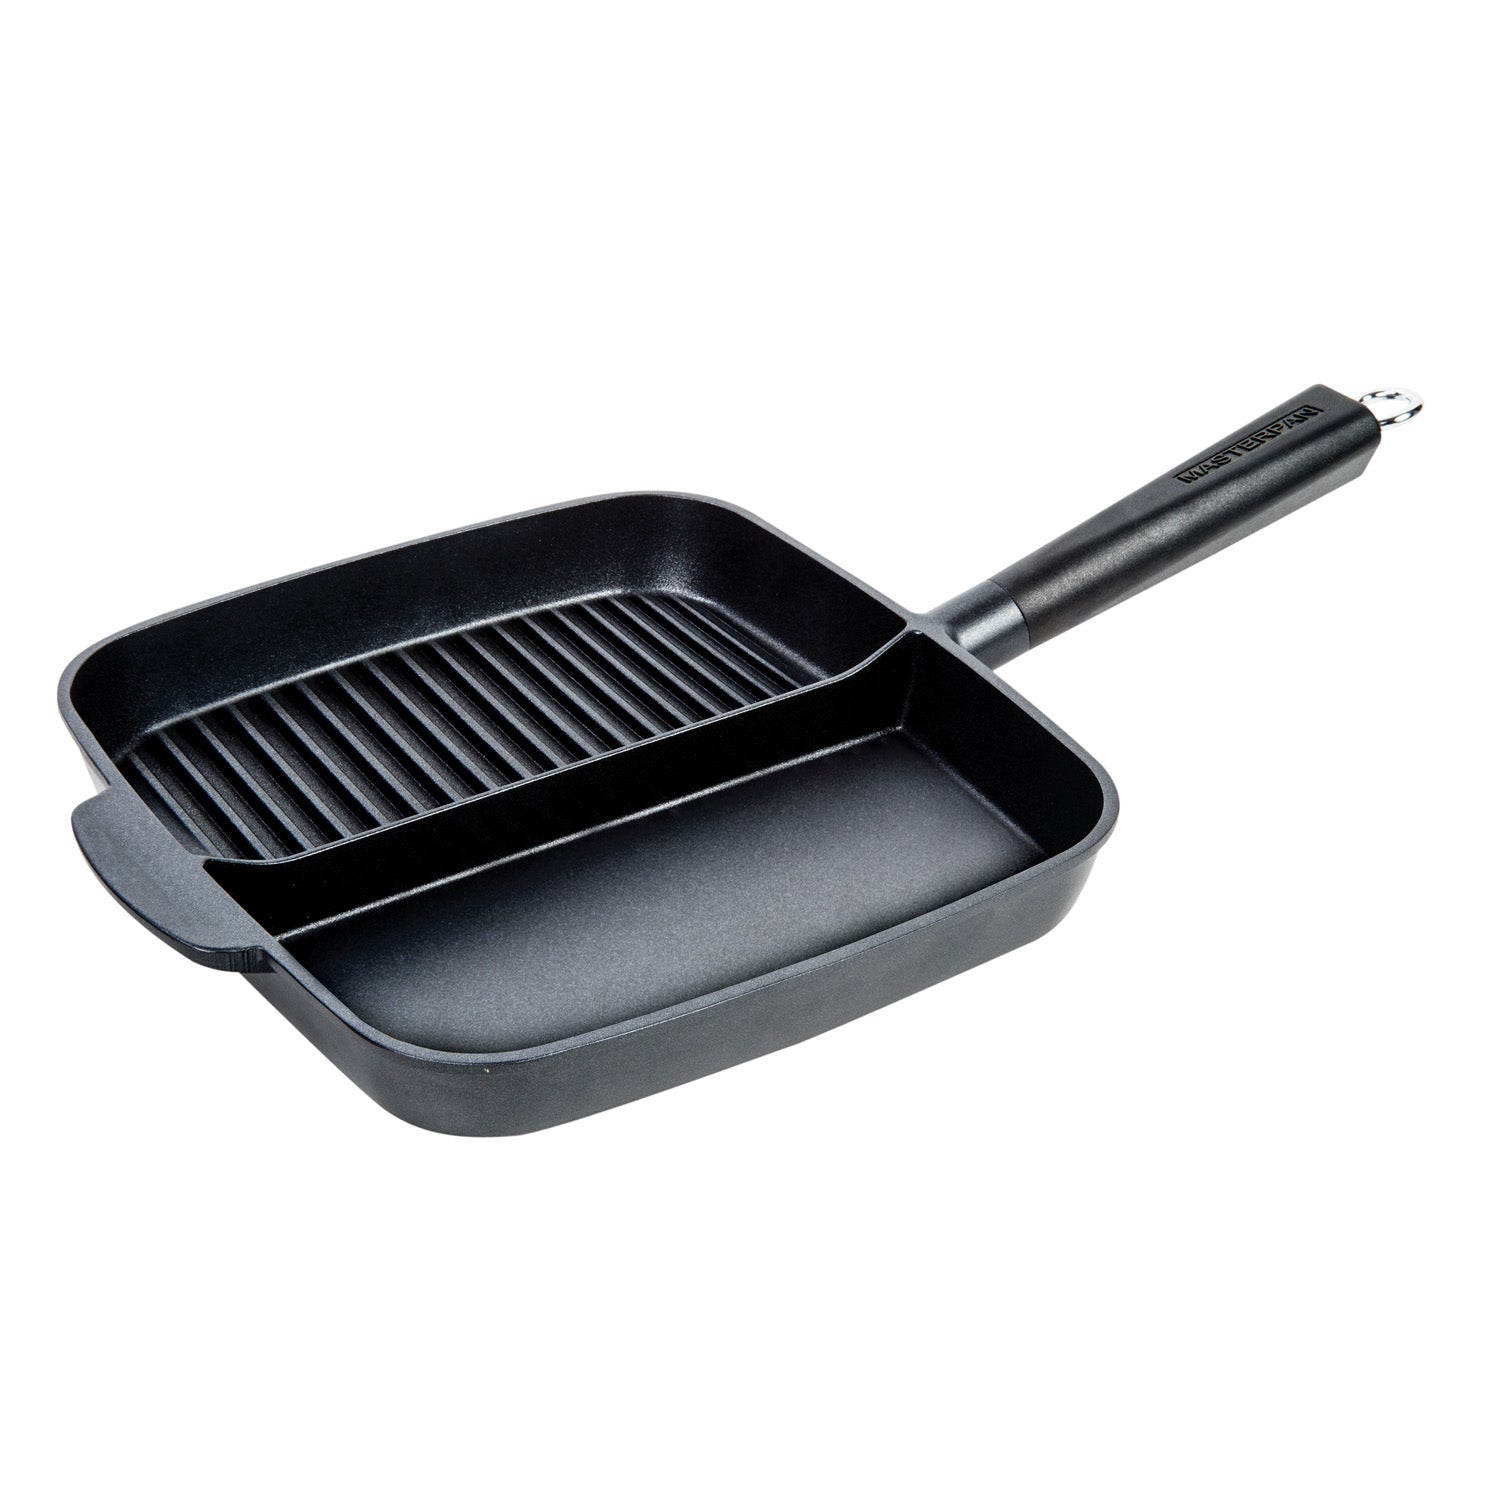 Non-Stick Cast Aluminum Grill & Griddle is an easy-to-clean skillet providing a superior Xylan Plus double layer non-stick coating by Whitford—safe